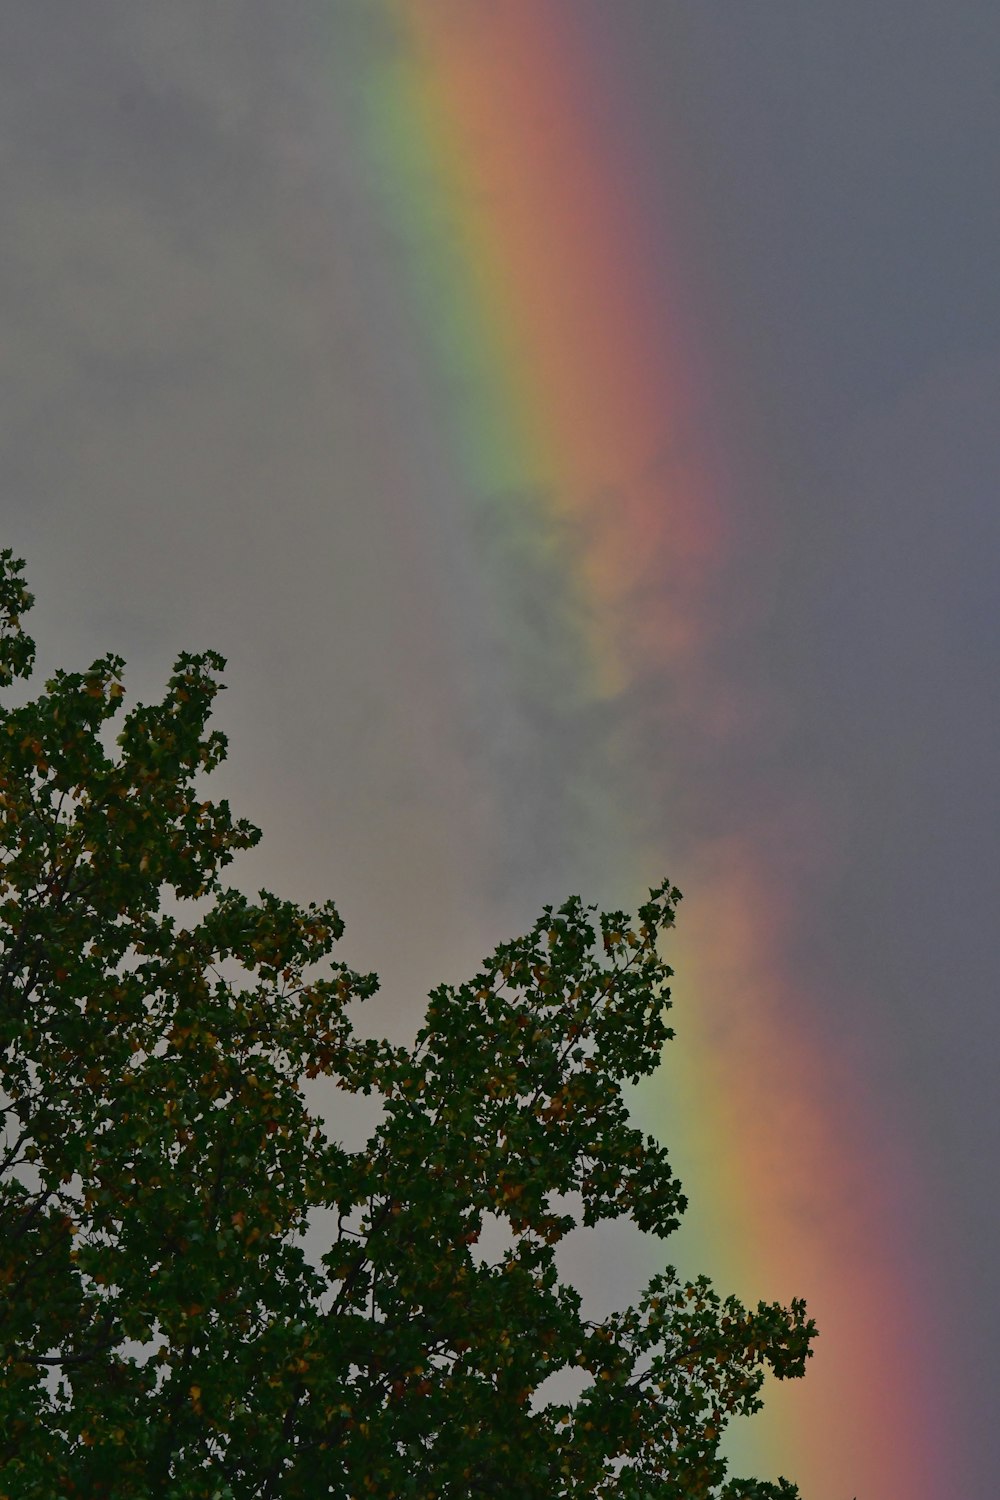 a rainbow shines in the sky above a tree